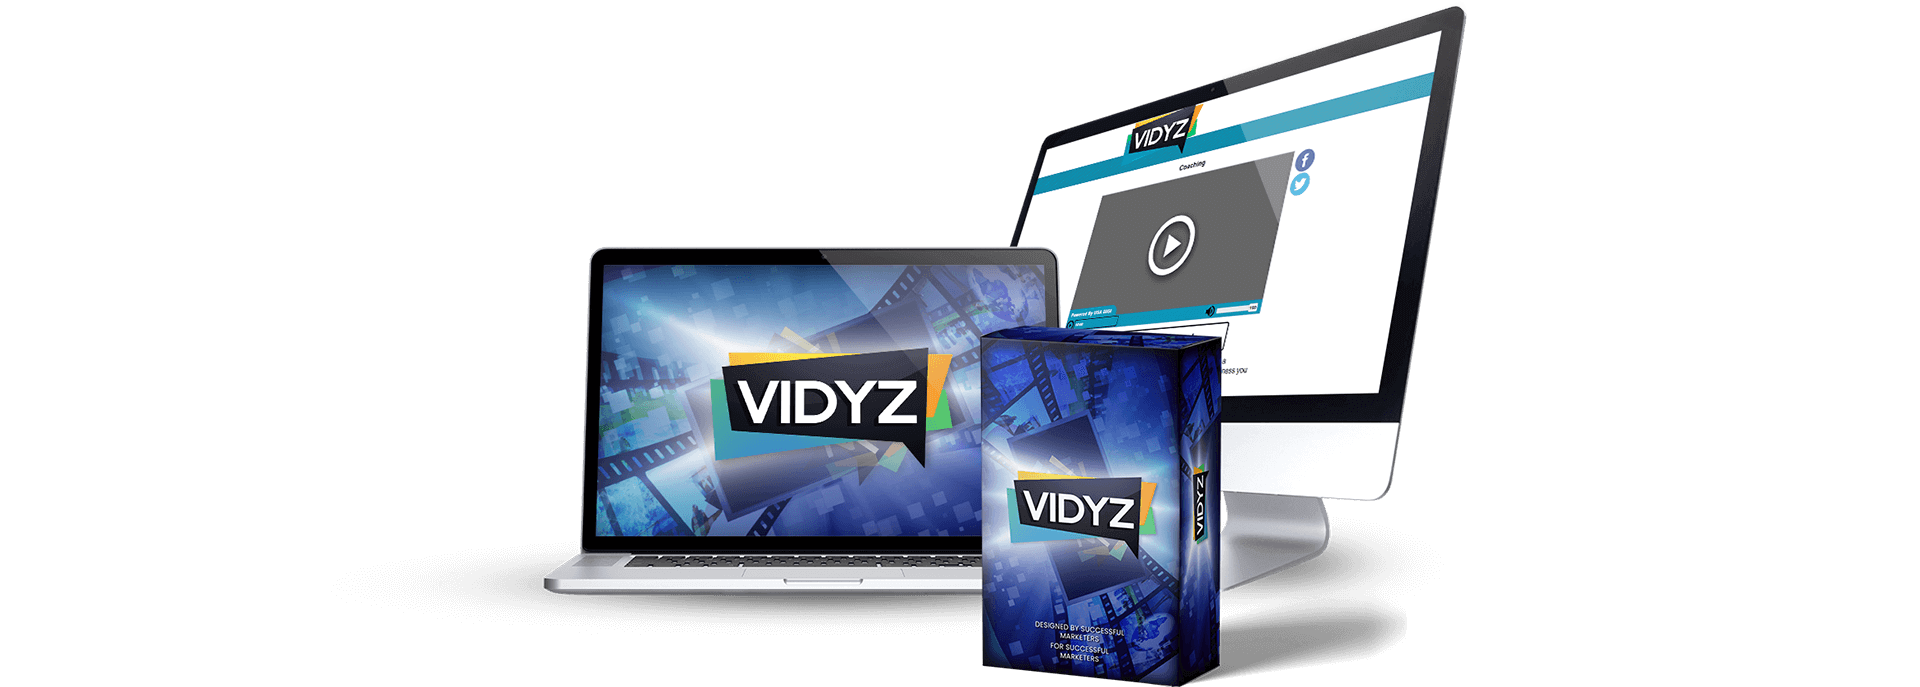 Mike From Maine – Vidyz 2.0 Free Download